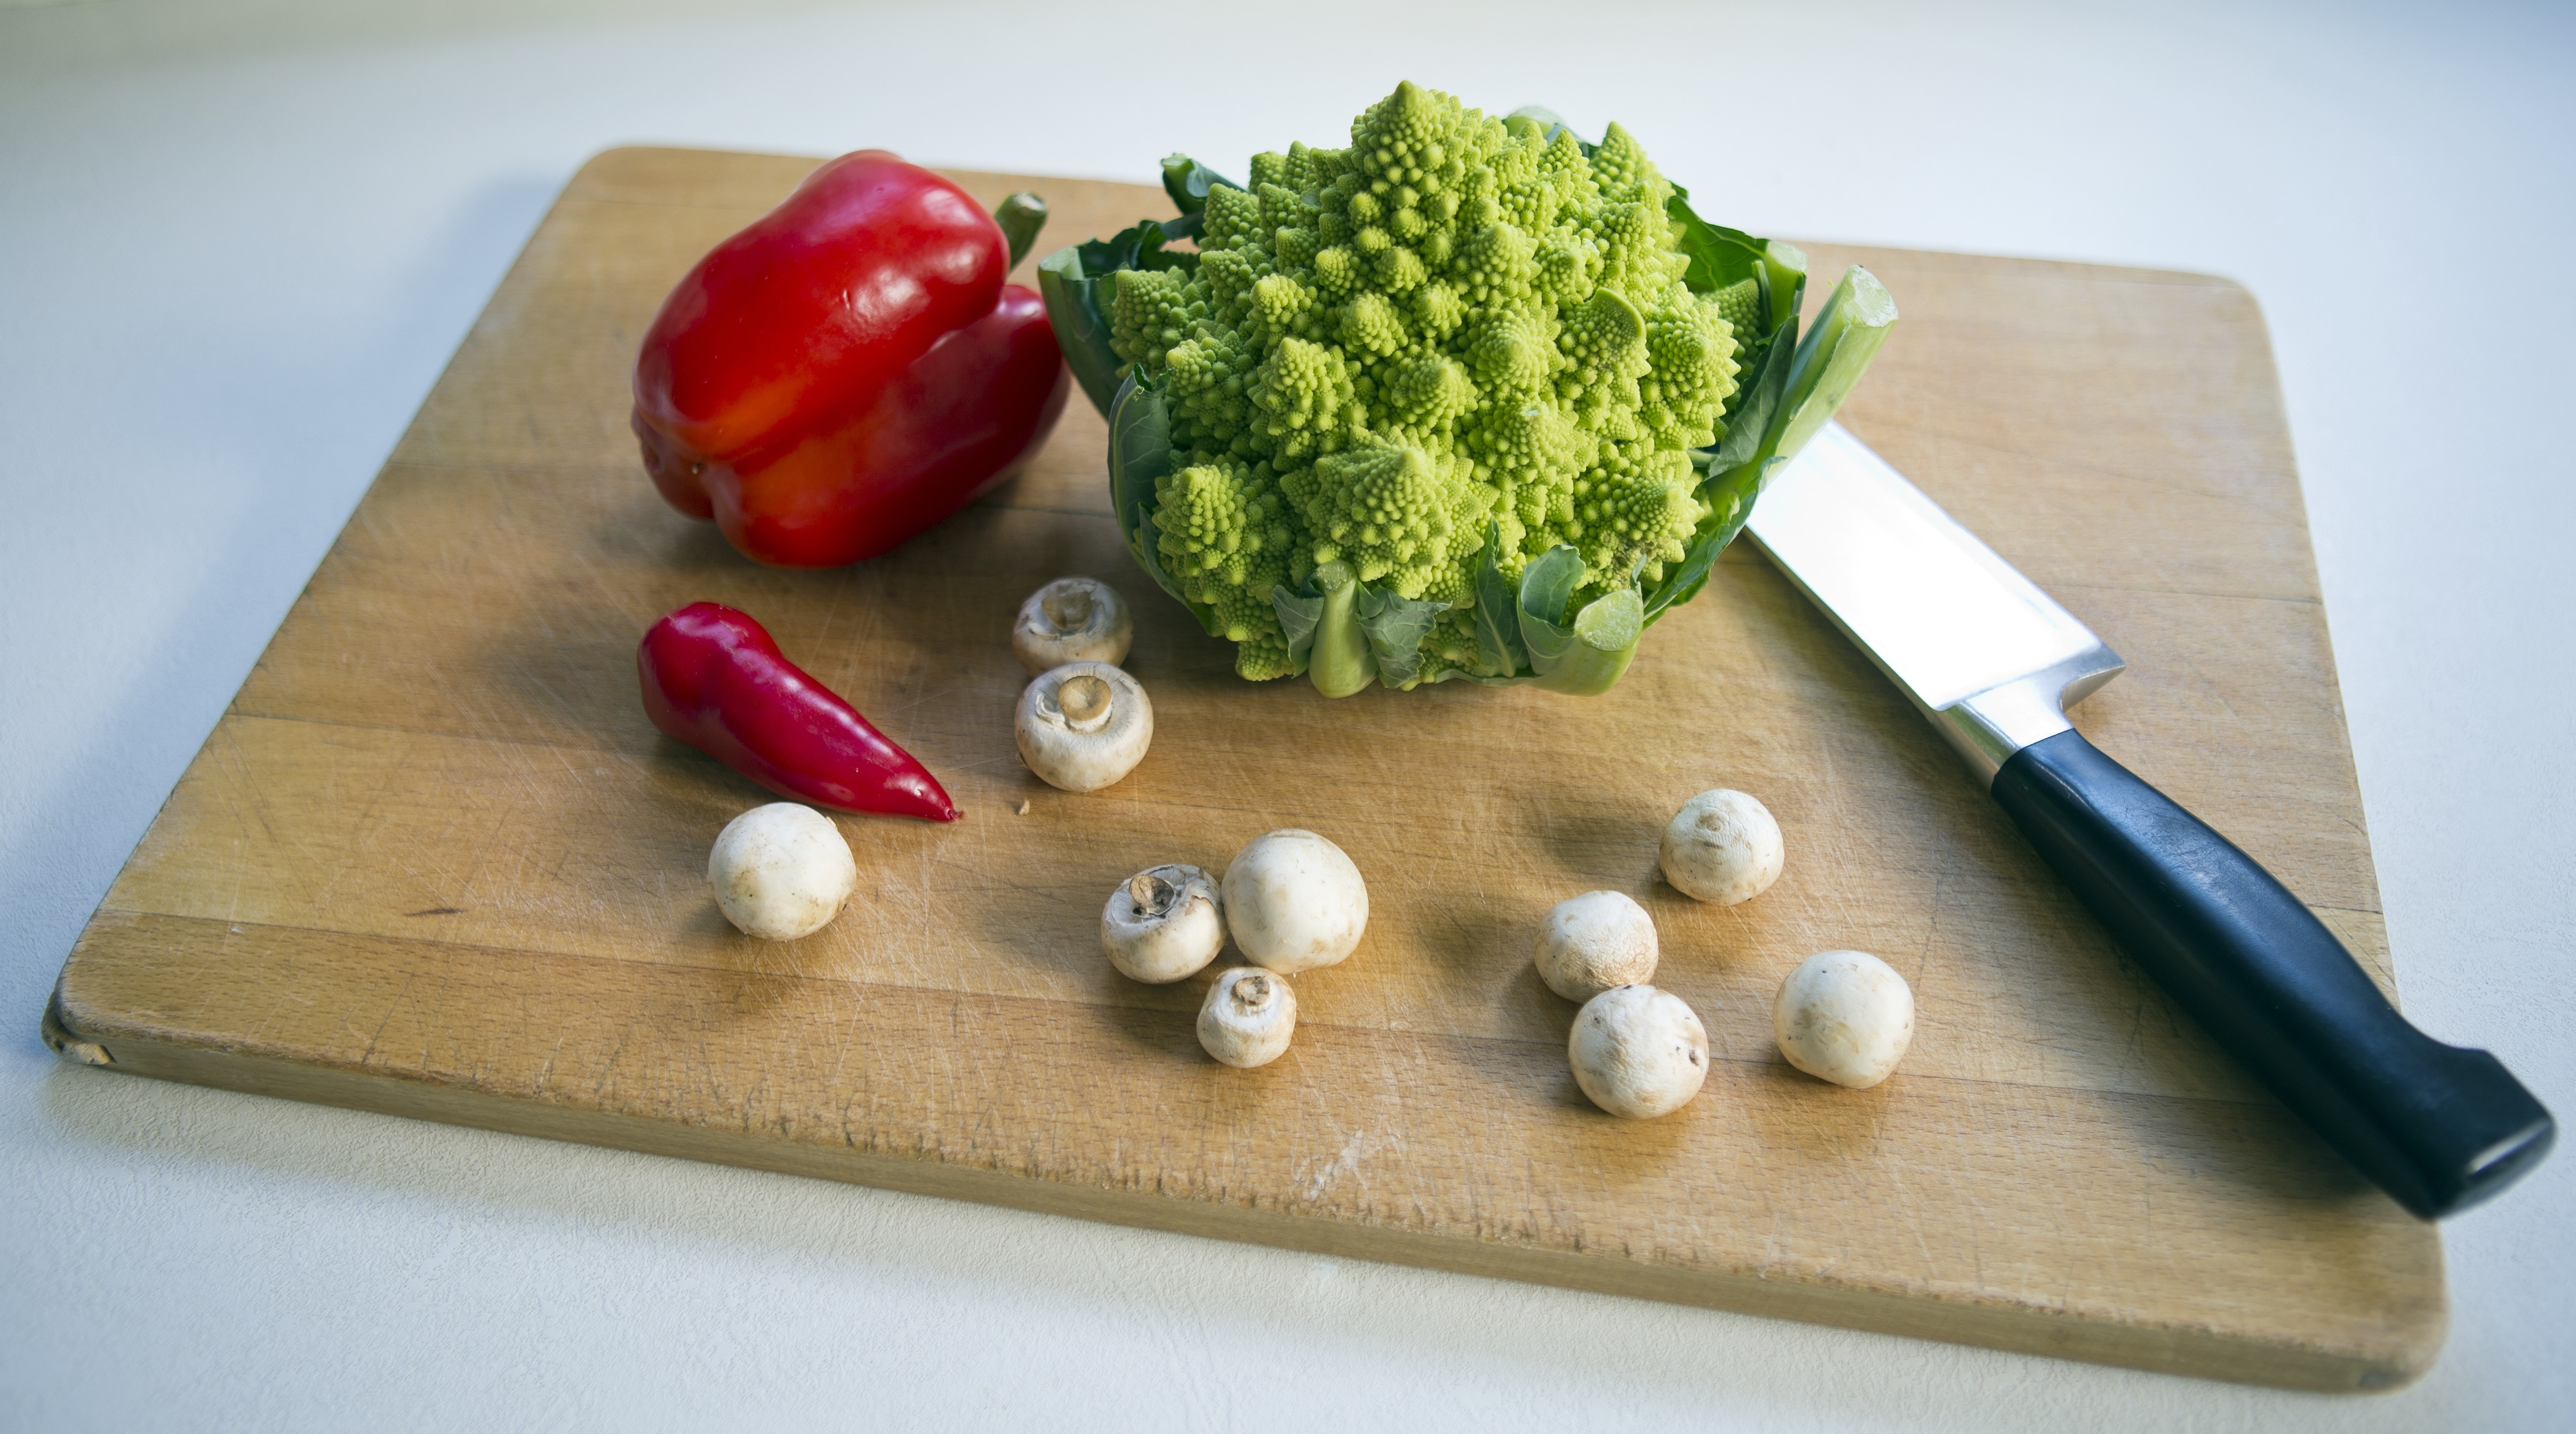 Red Pepper, Romanesca Cauliflower, vegetable, food and drink